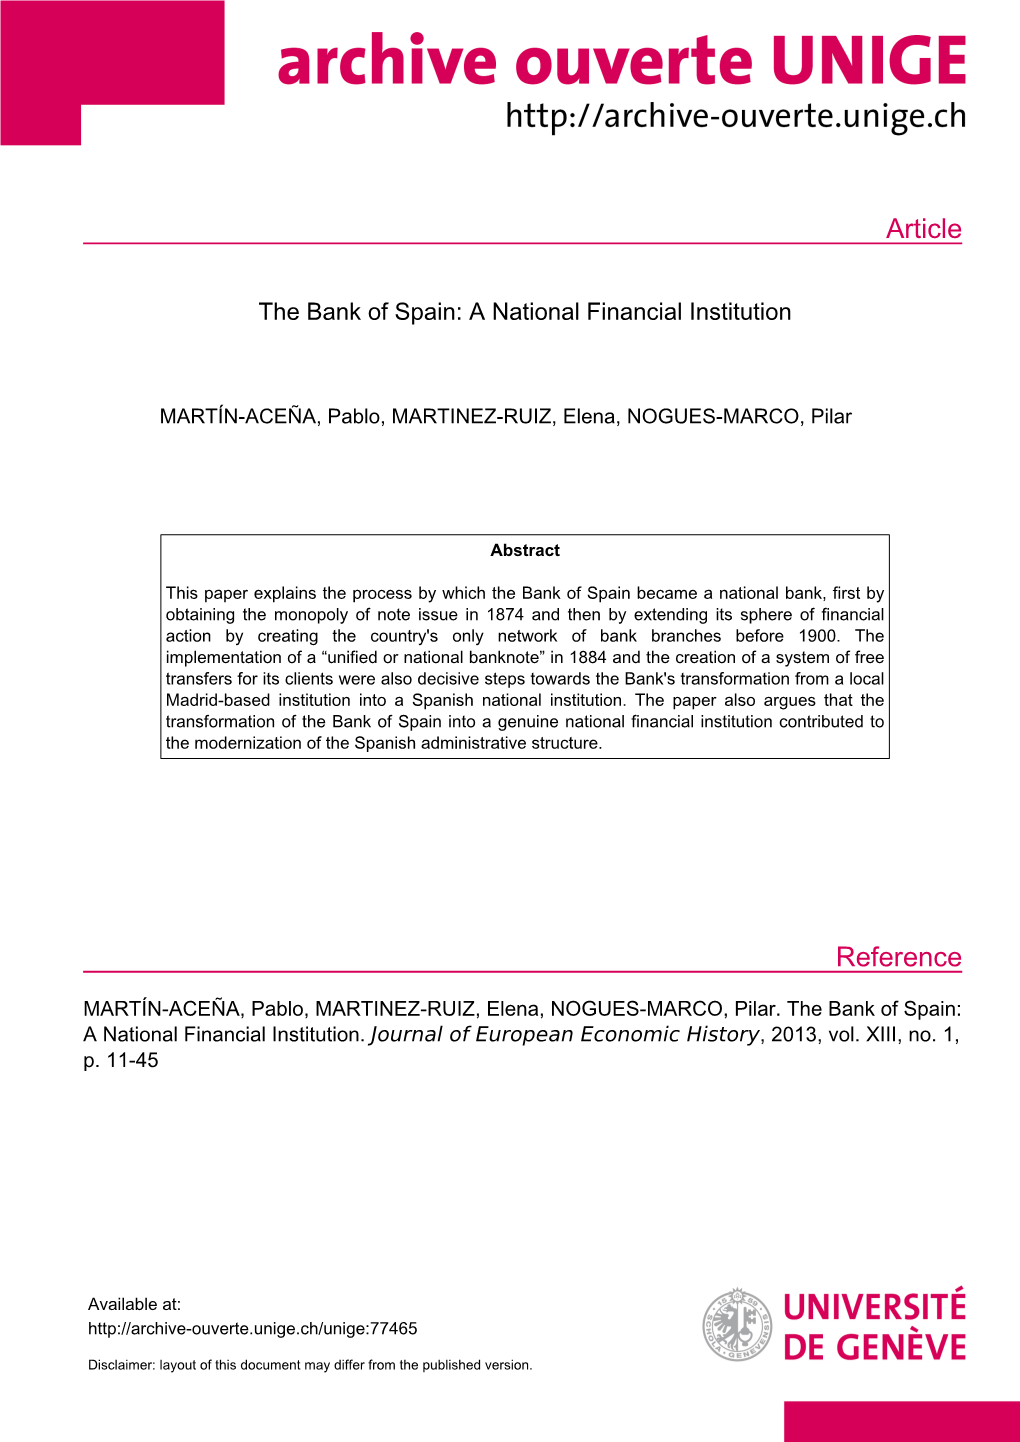 The Bank of Spain: a National Financial Institution